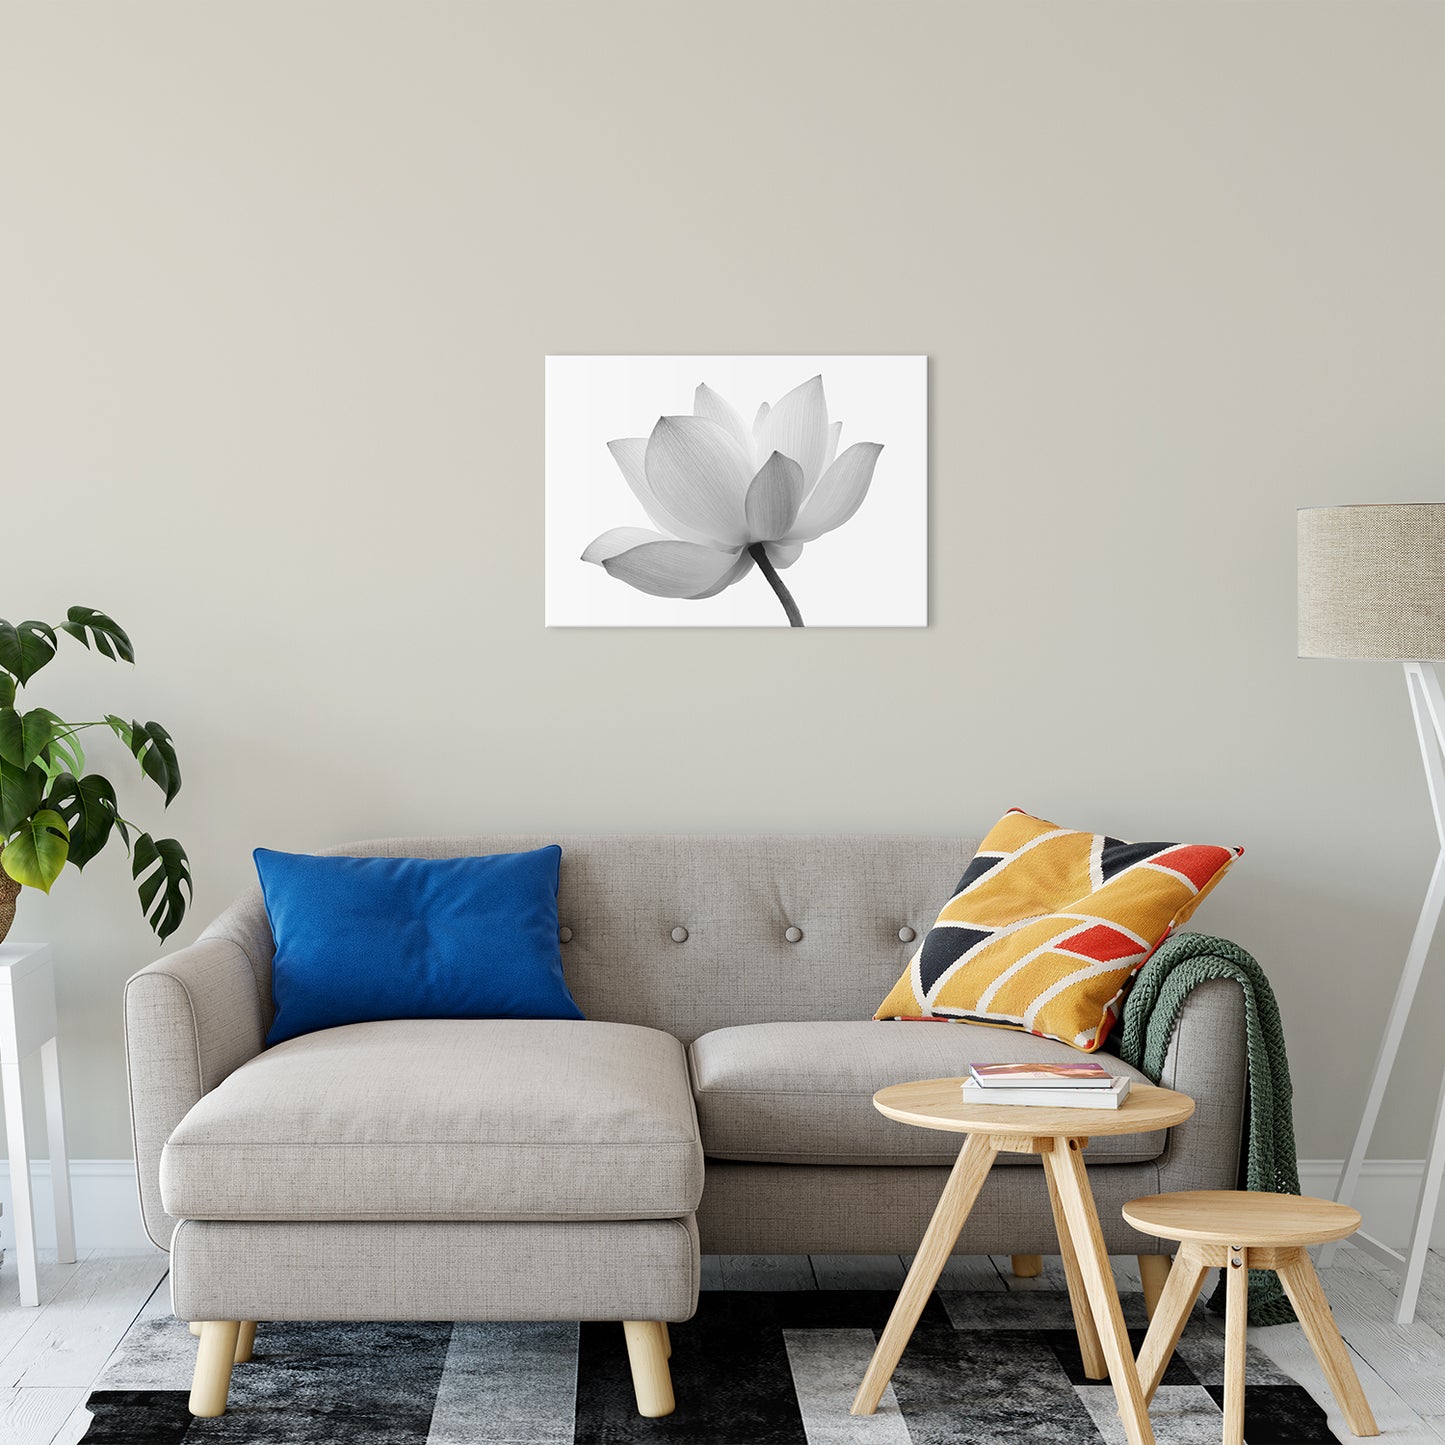 Lotus Flower Black and White Floral Nature Photo Fine Art Canvas Print 20" x 30" - PIPAFINEART